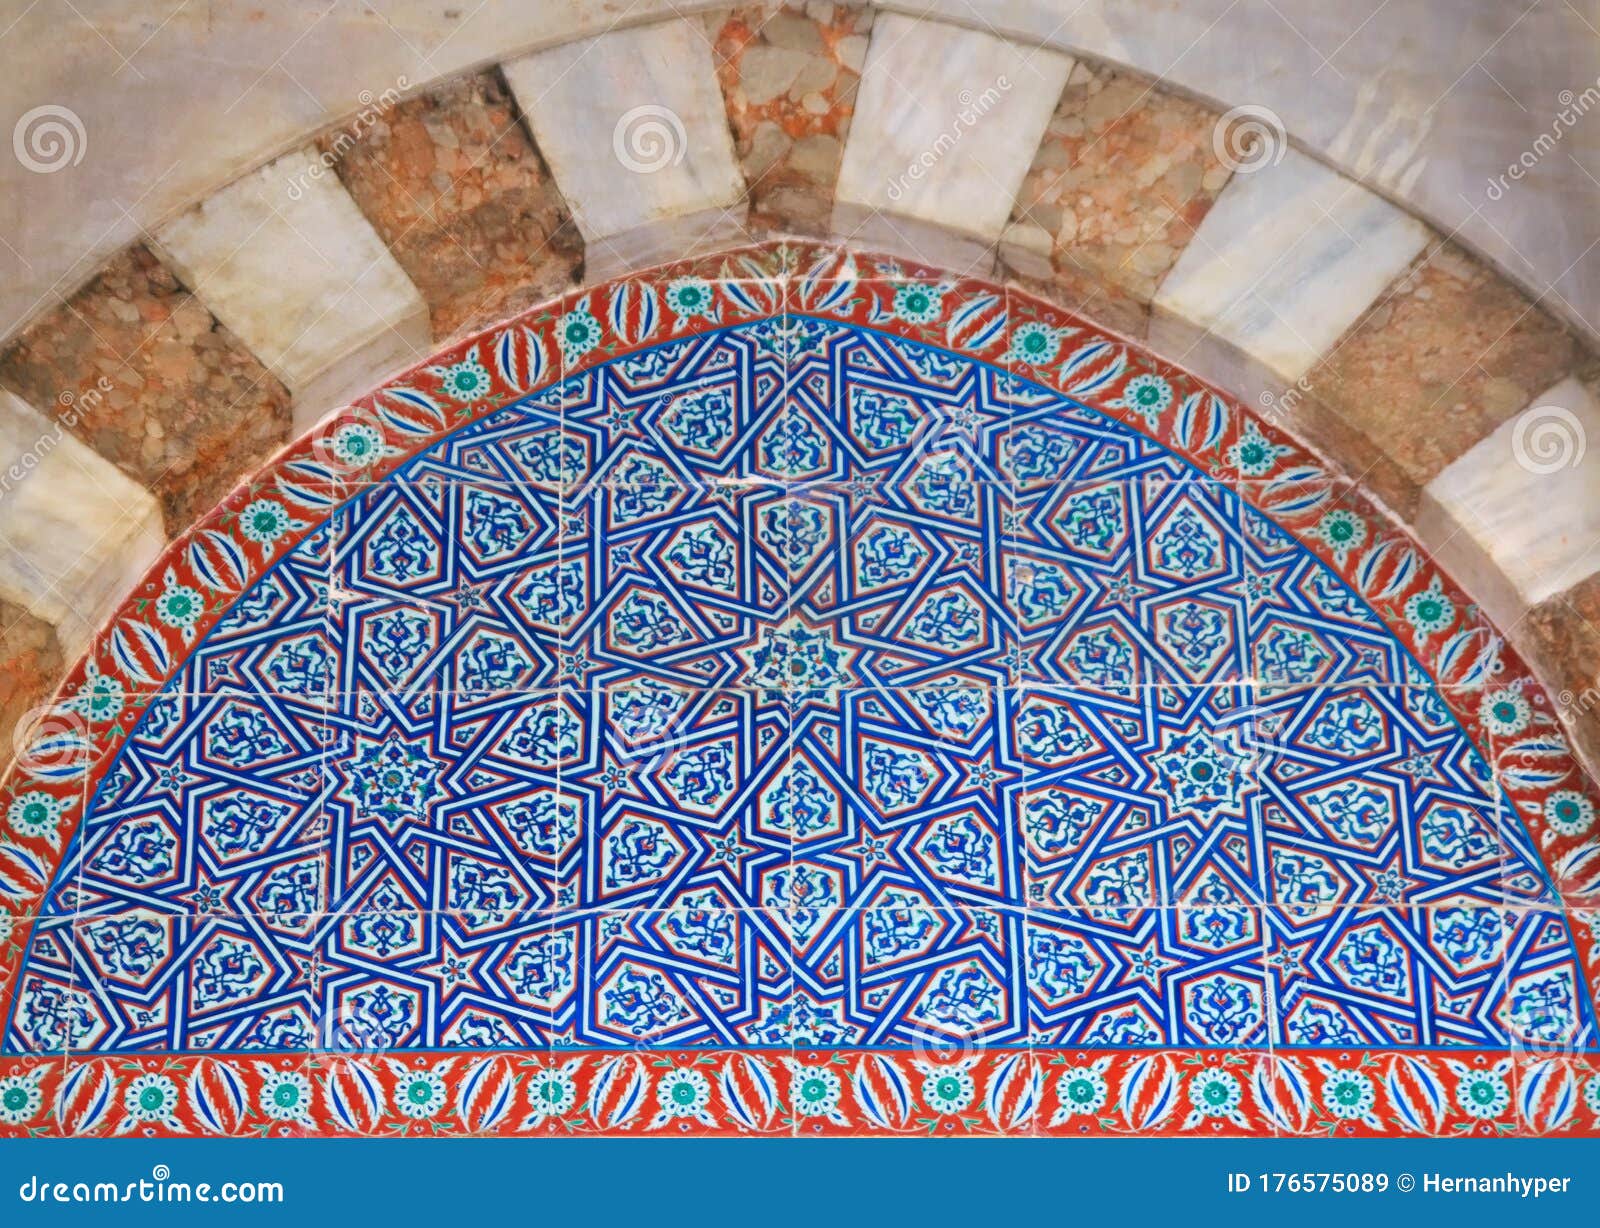 detail of an architectural ornament in the blue mosque of sultanahmed, located in istanbul, turkey